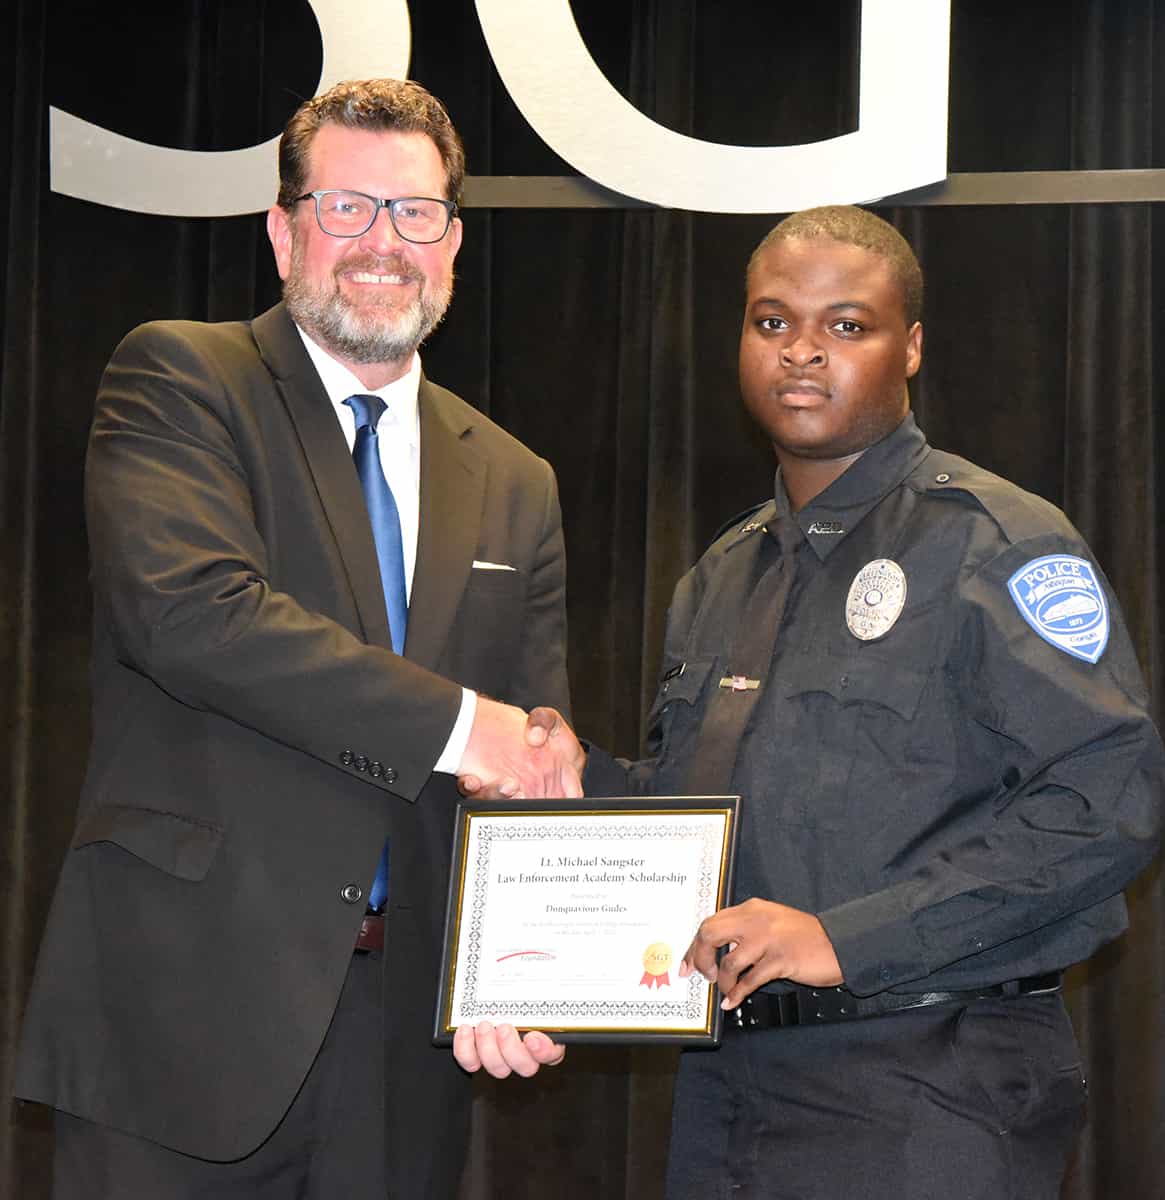 South Georgia Technical College President Dr. John Watford is shown above presenting the Lt. Michael Sangster Law Enforcement Academy Scholarship to Donquavious Gudes.